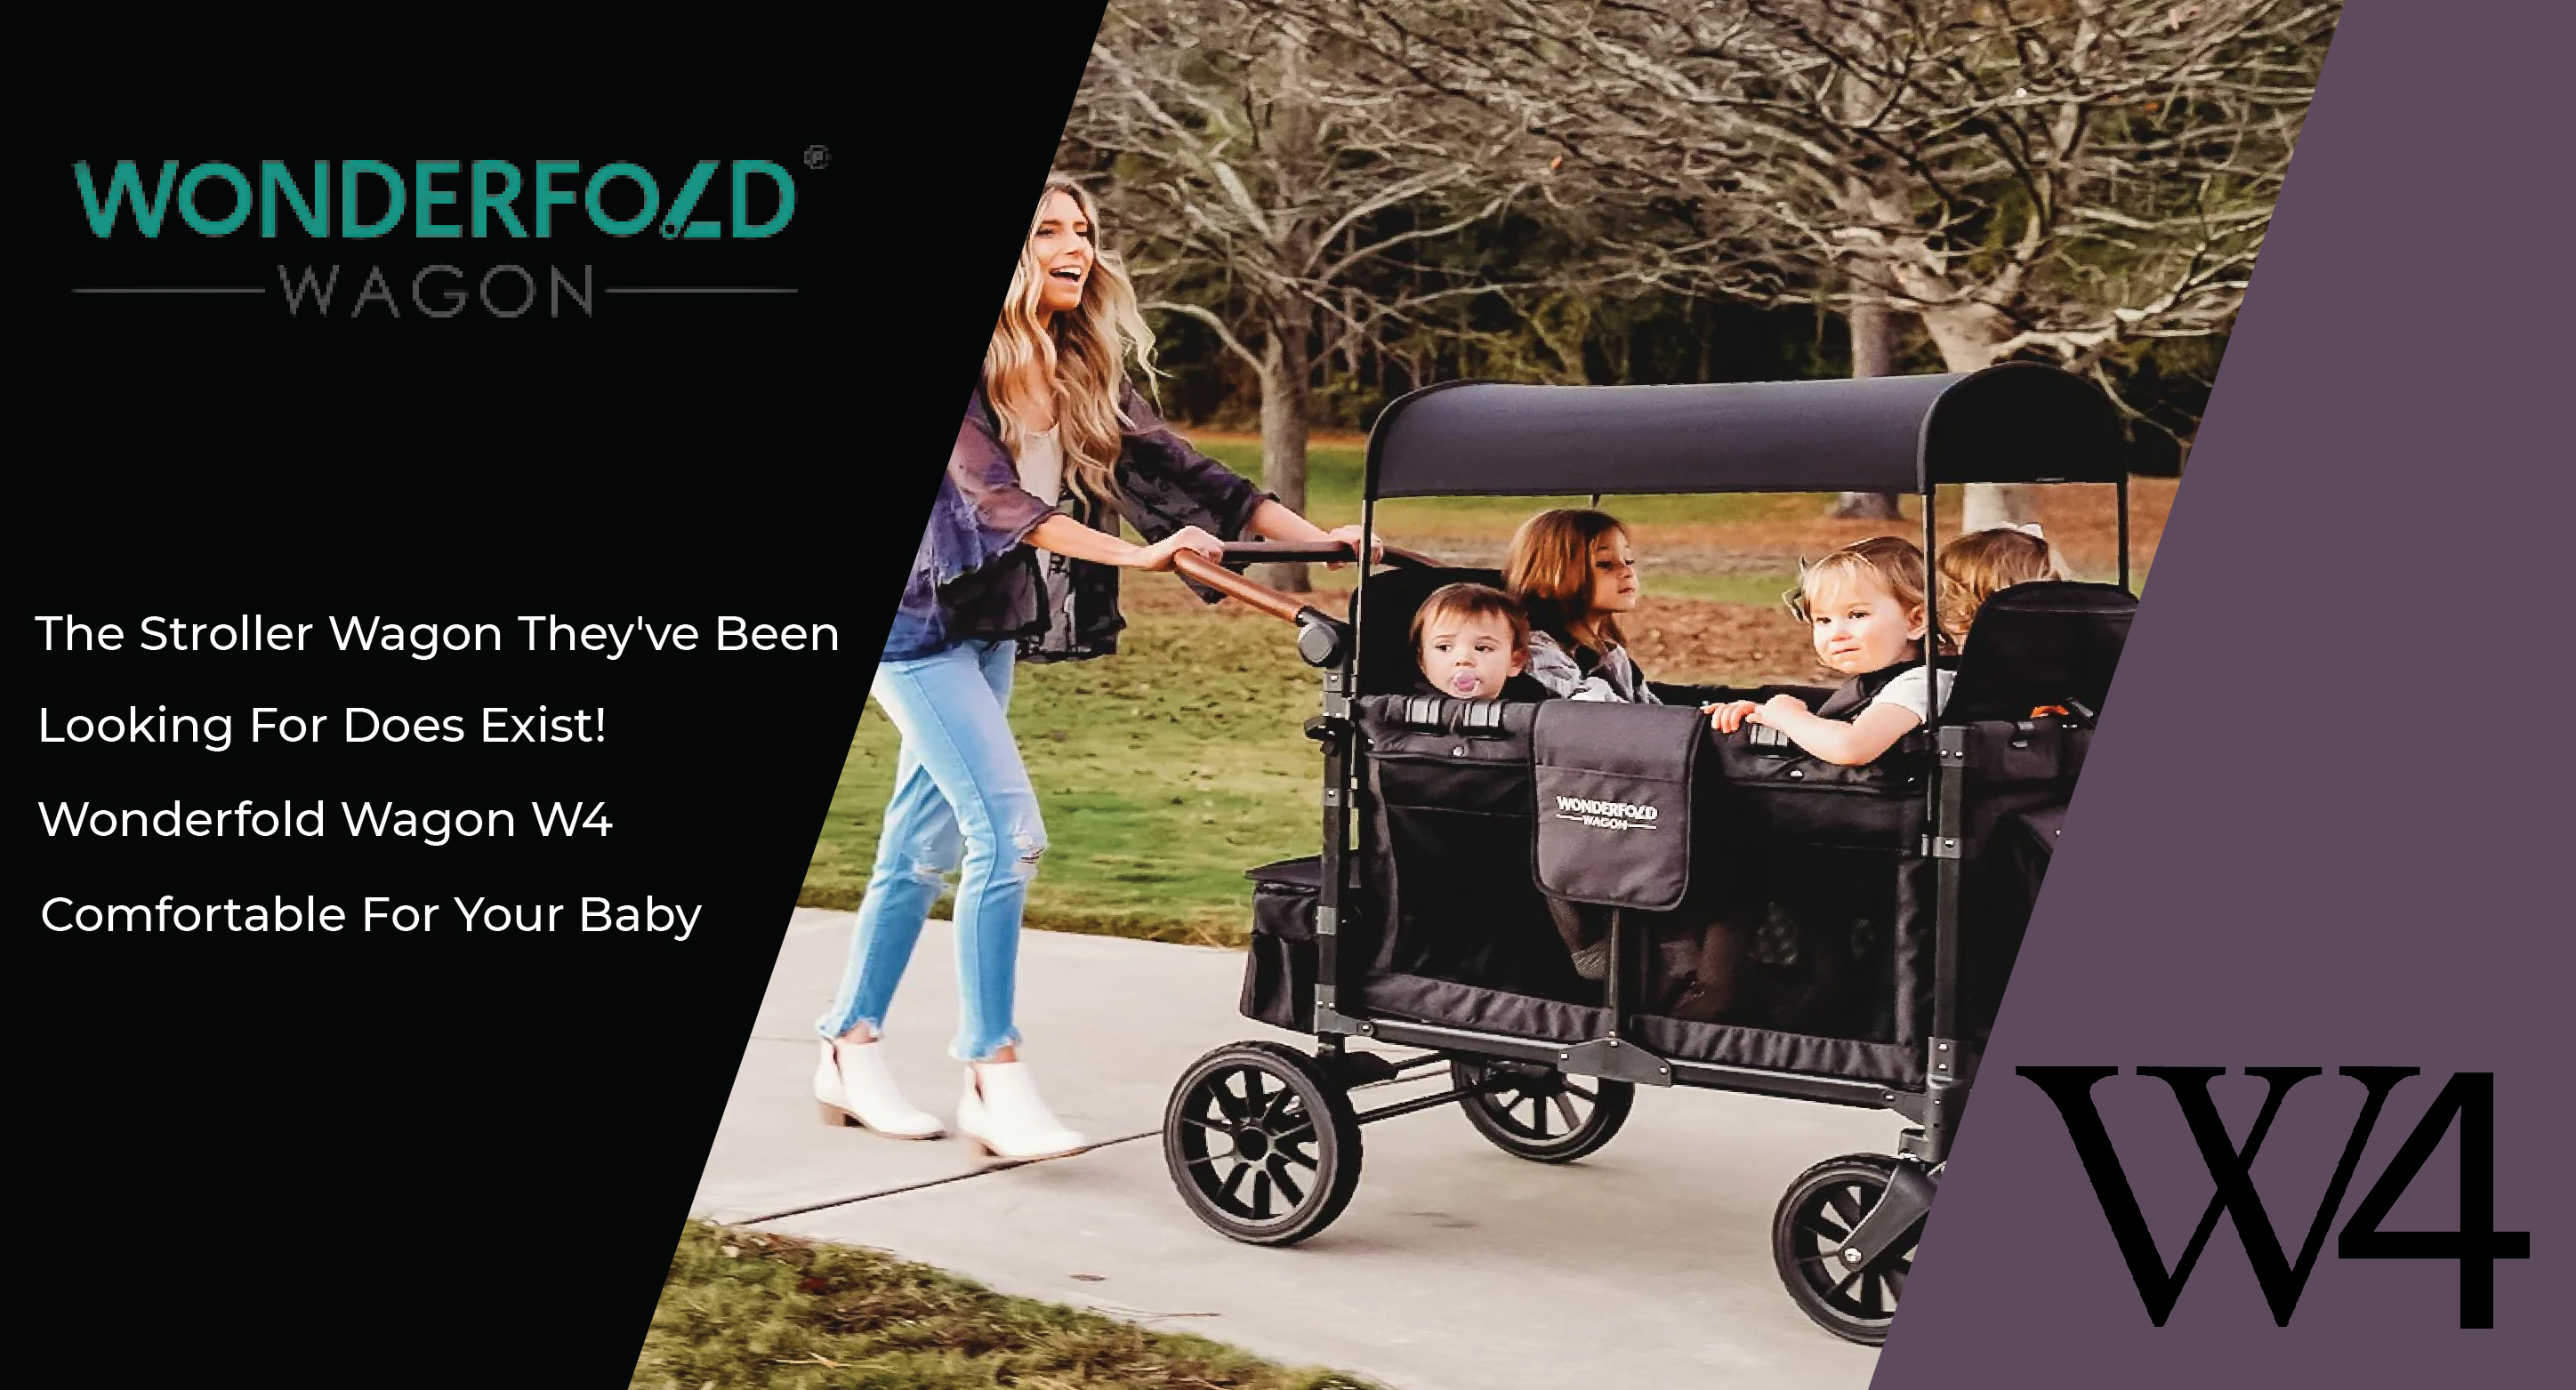 The Stroller Wagon You Have Been Looking For Does Exist! Wonderfold Wagon W4 - Comfortable For Your Baby